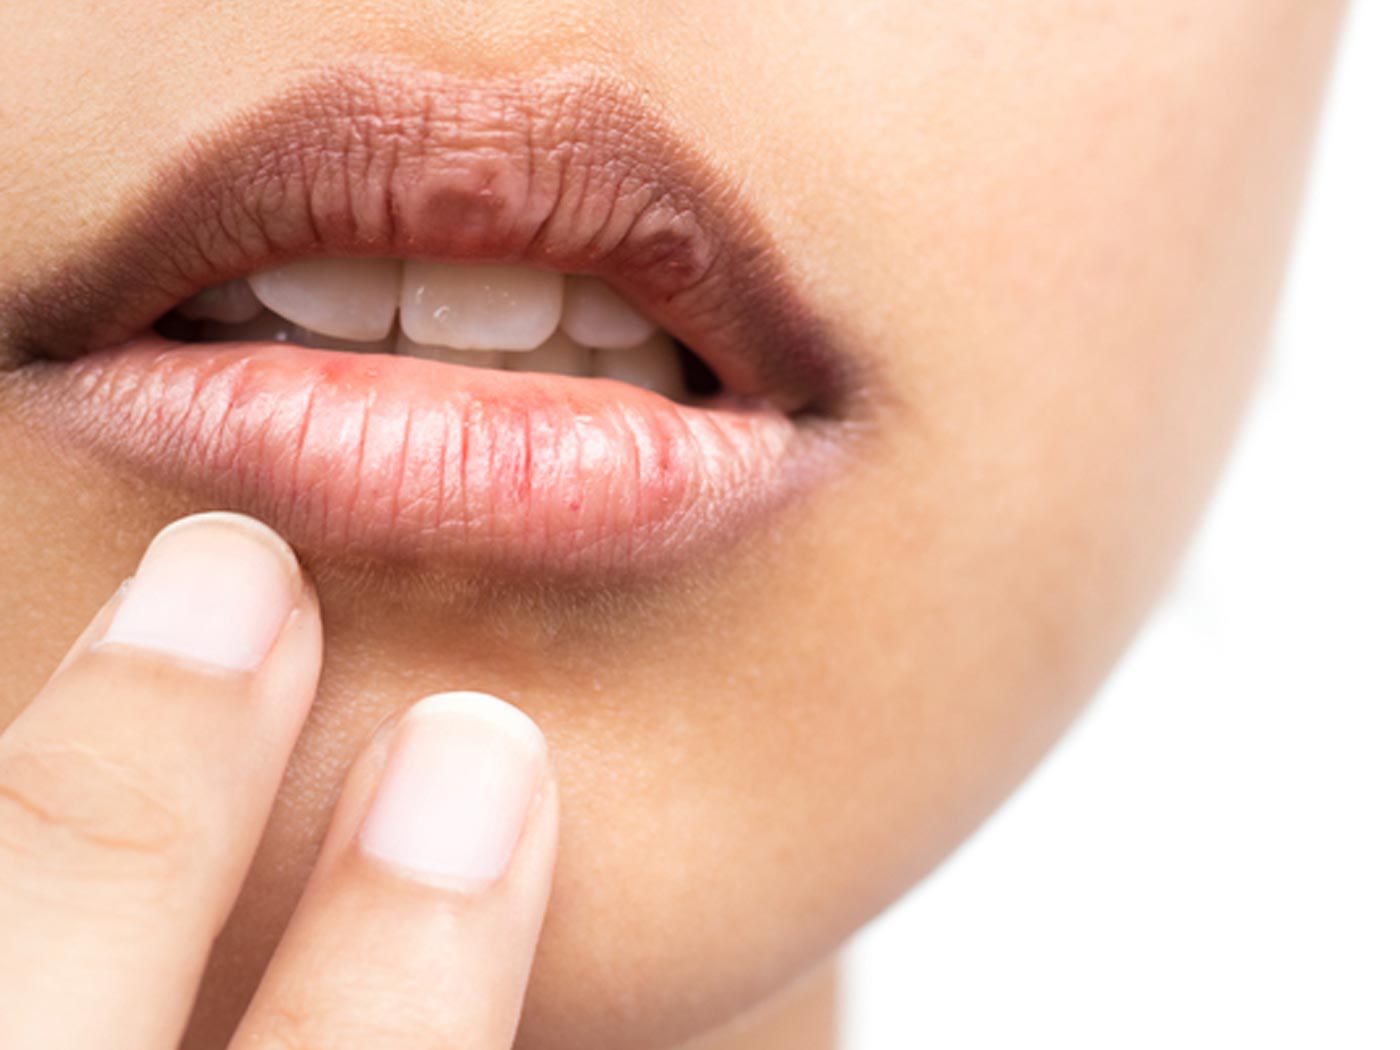 Chapped Lips Causes And Treatment Of Chapped Lips Pure Sense